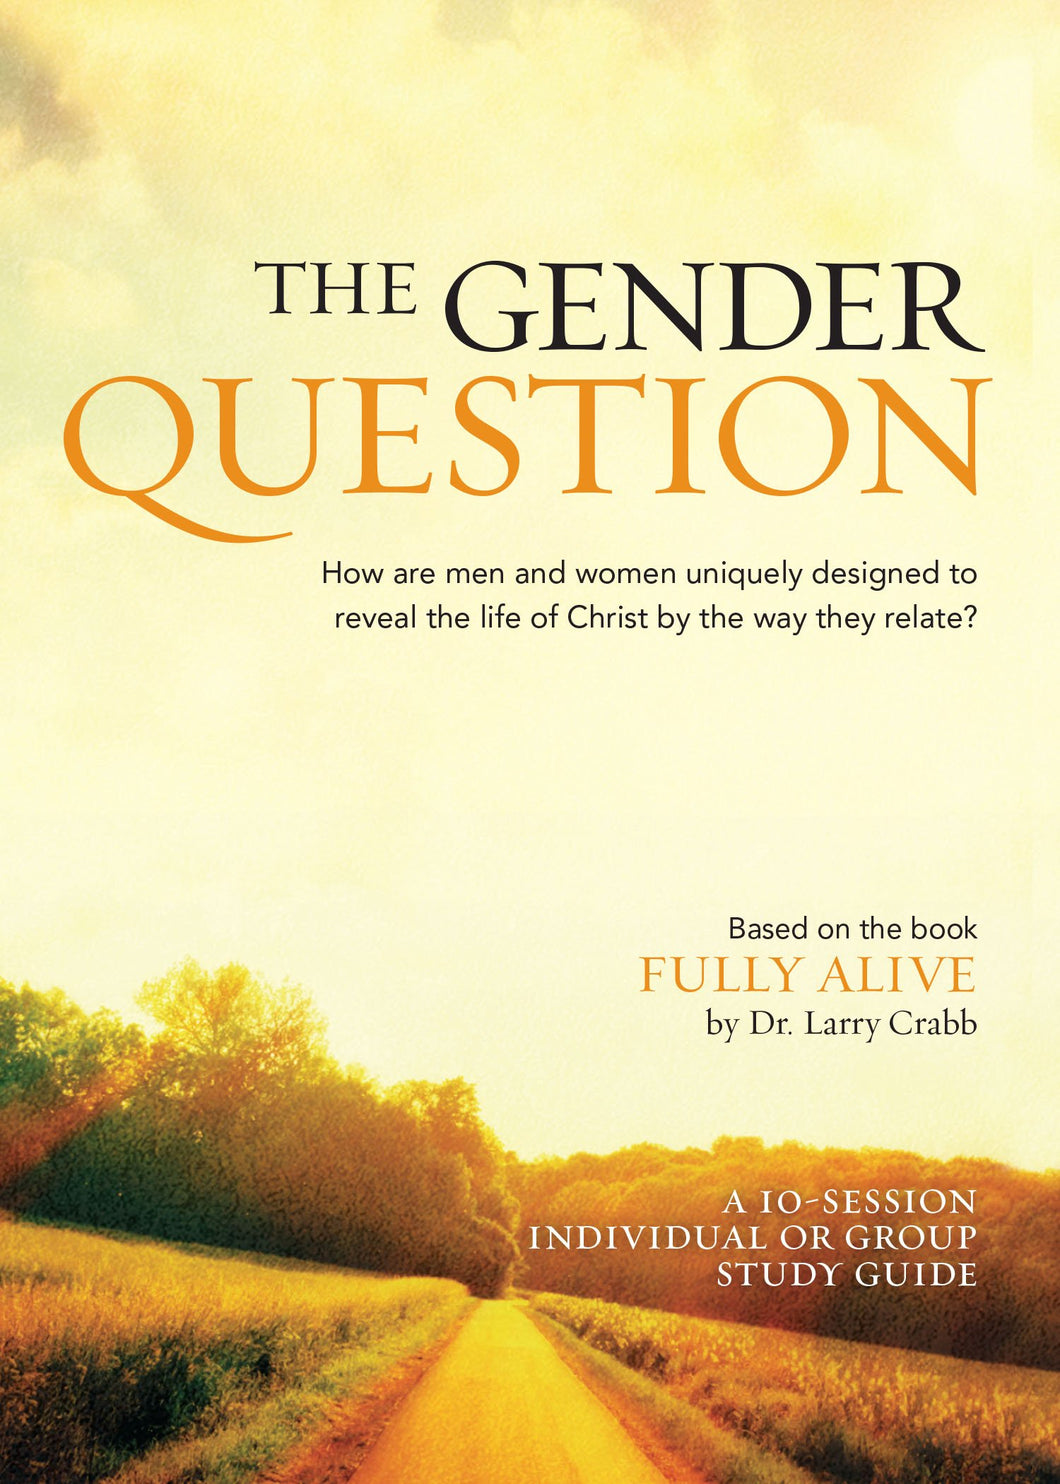 Facilitators Guide for The Gender Question DVD Series based on the book Fully Alive